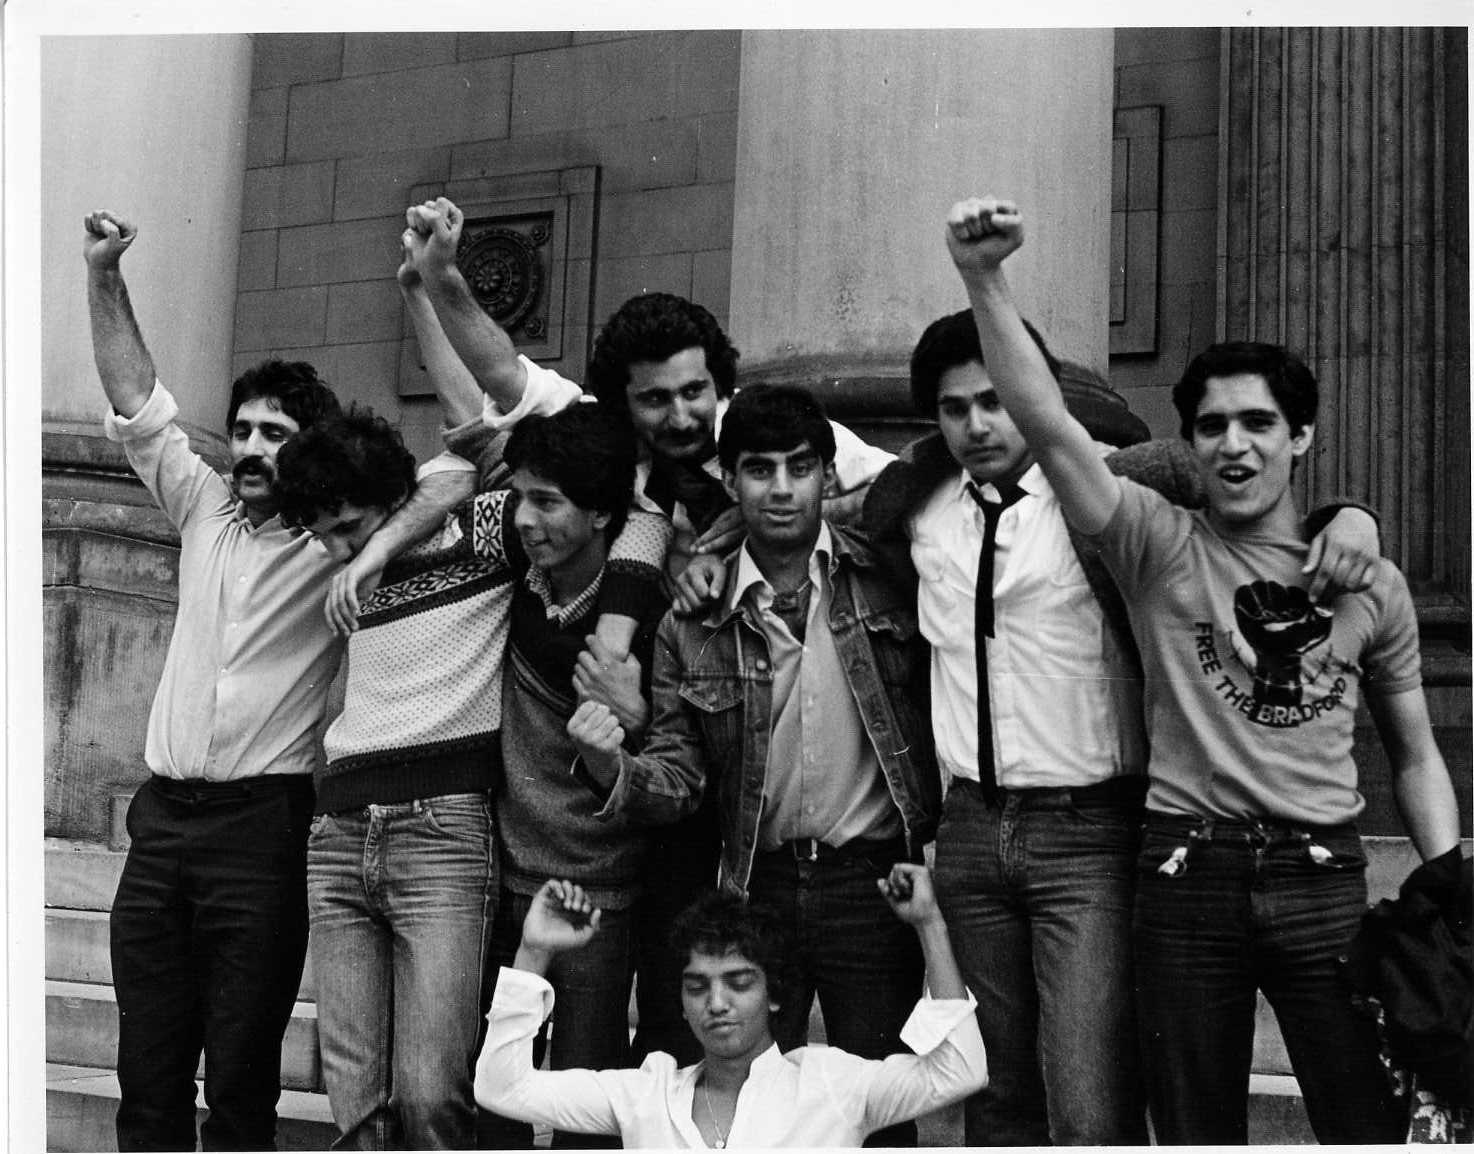 
The 'Bradford 12' defendants after their acquittal during the landmark 1981 case that enshrined self-defence into English law [Courtesy:Ruth Bundey/www.tandana.org]
